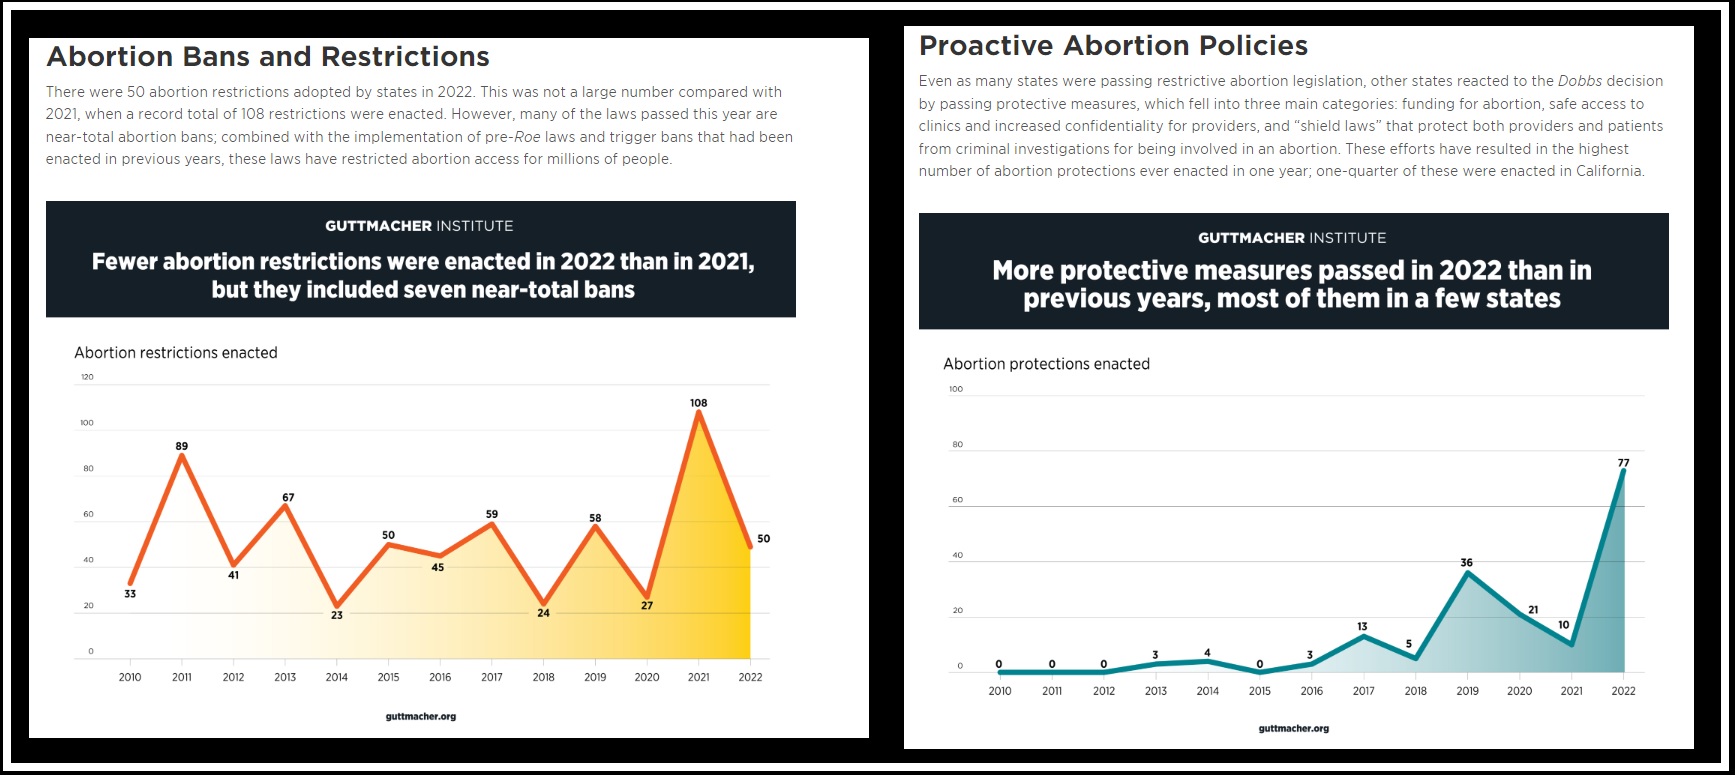 Image: 2022 Abortion bans in effect while Pro-life laws down, abortion expansions up per Guttmacher Institute